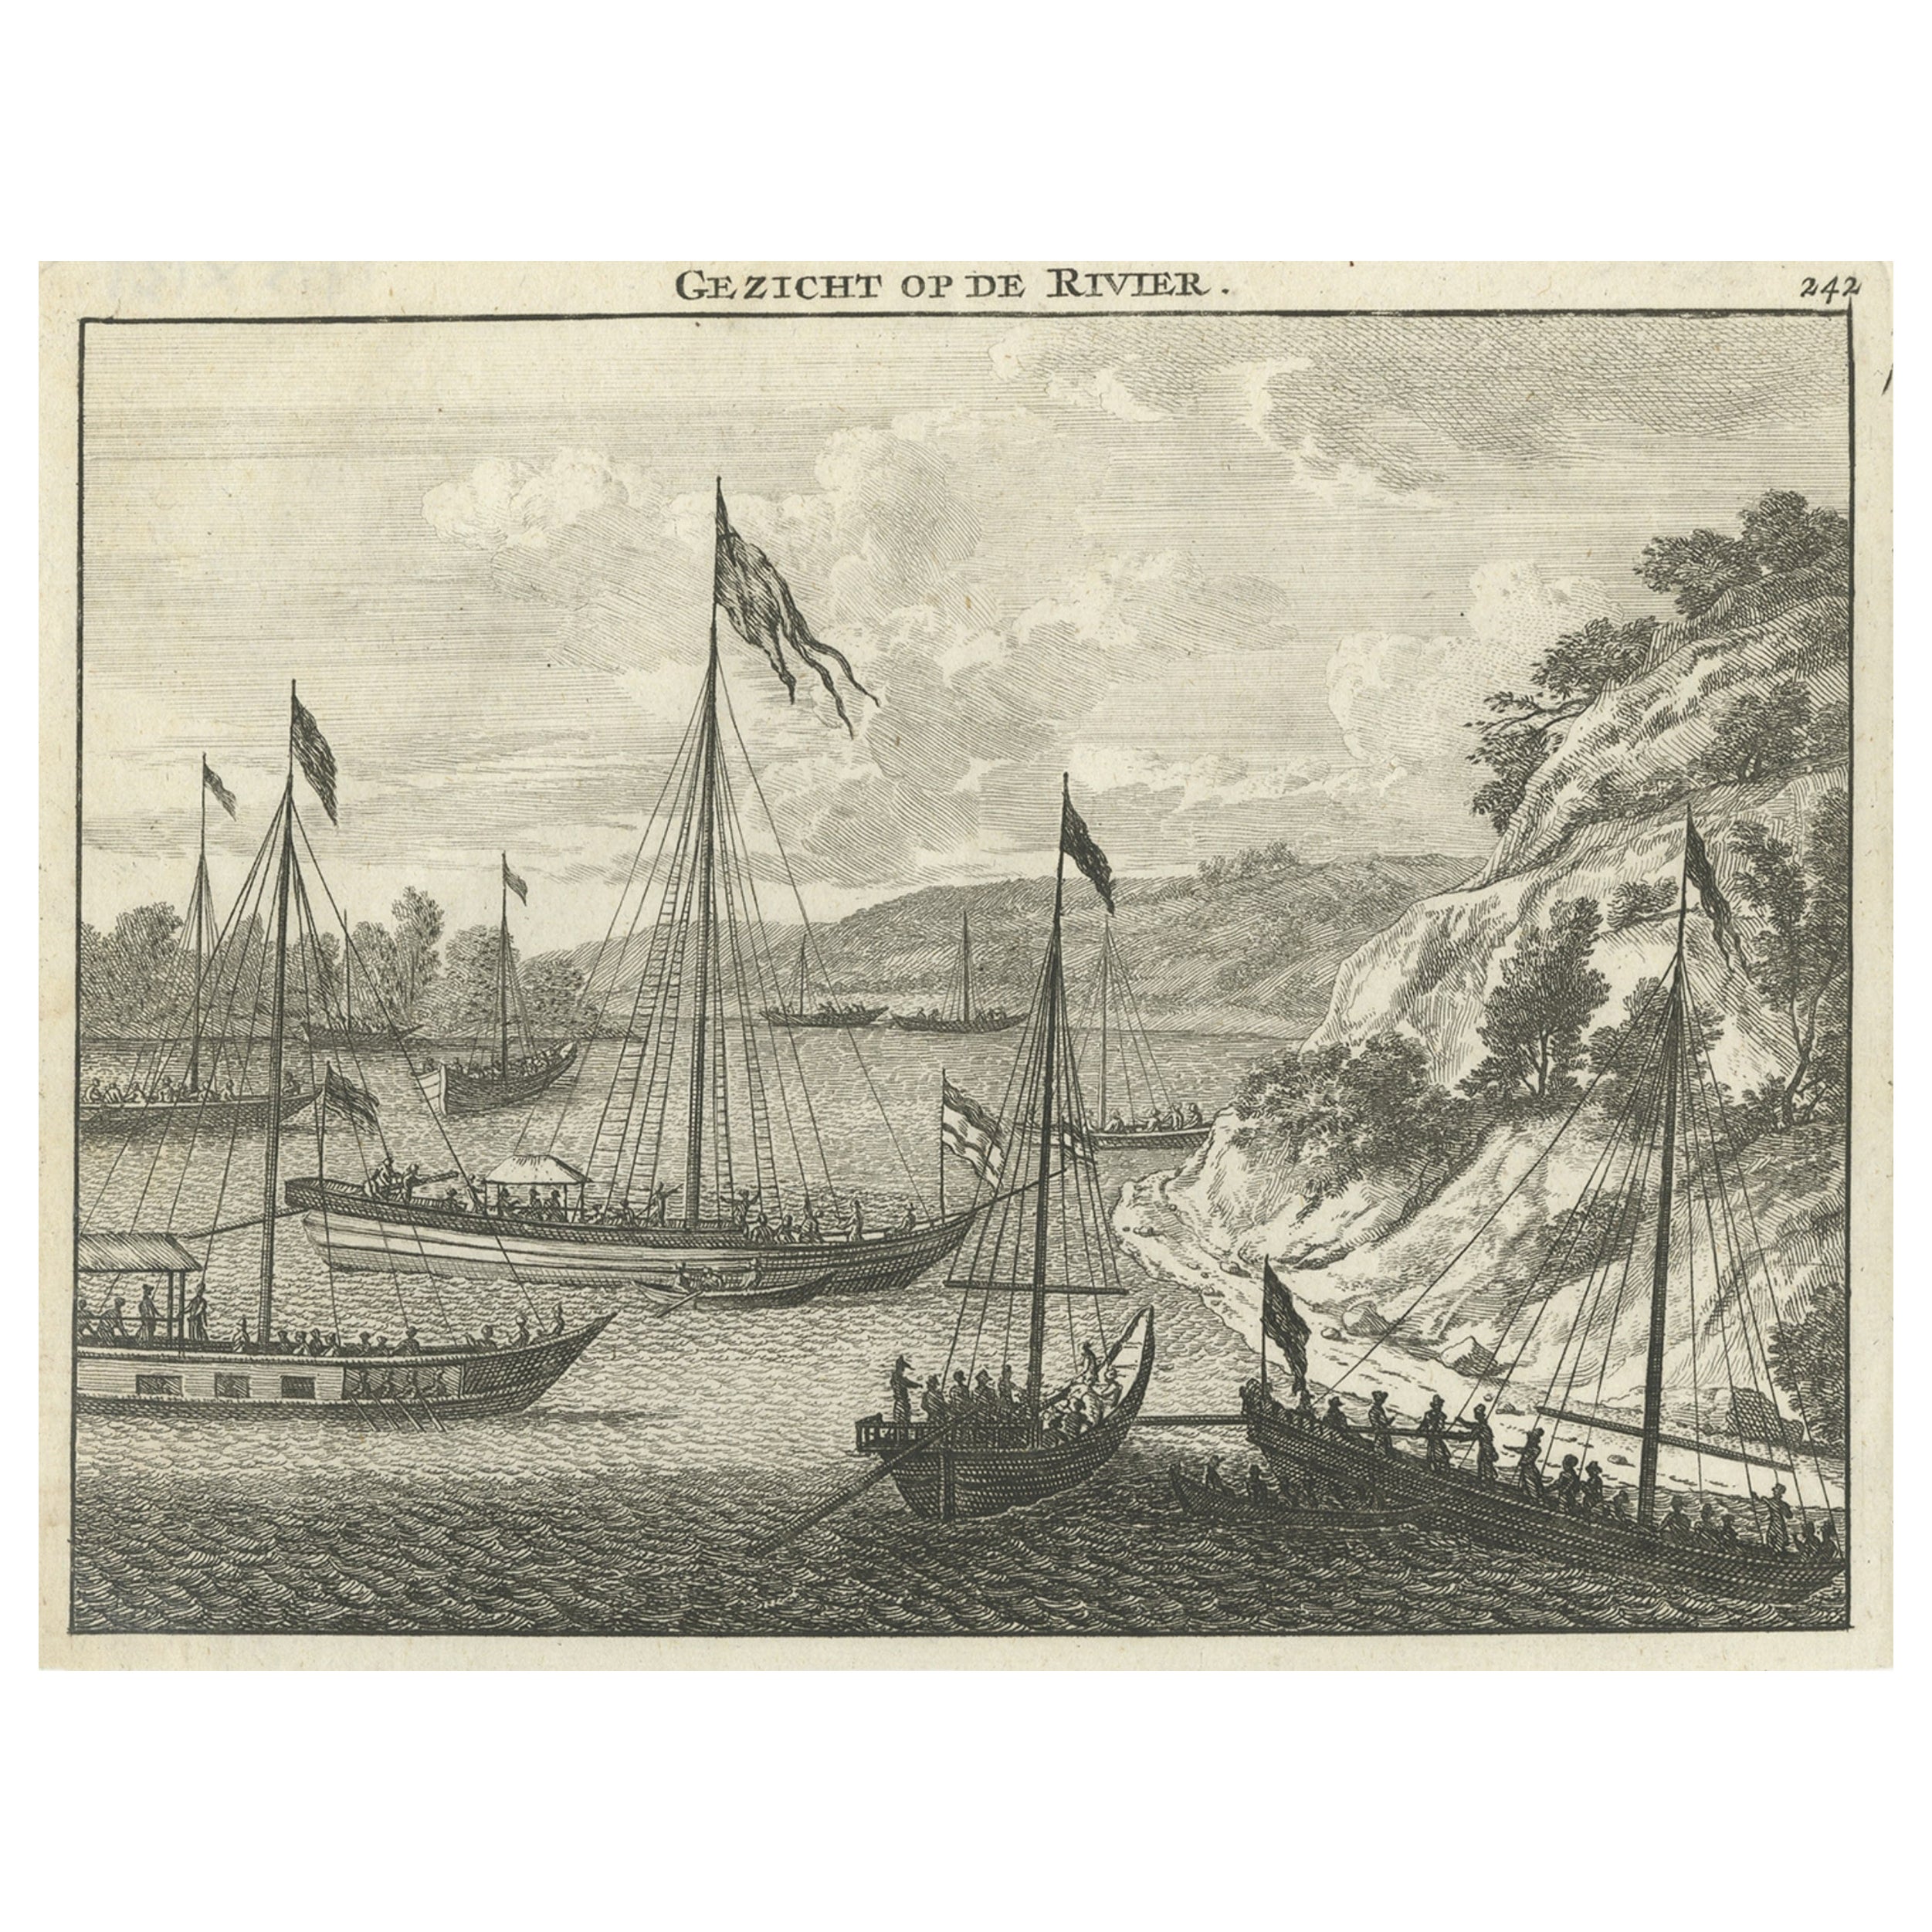 Copper Engraving with a View on the Volga River in Russia, 1714